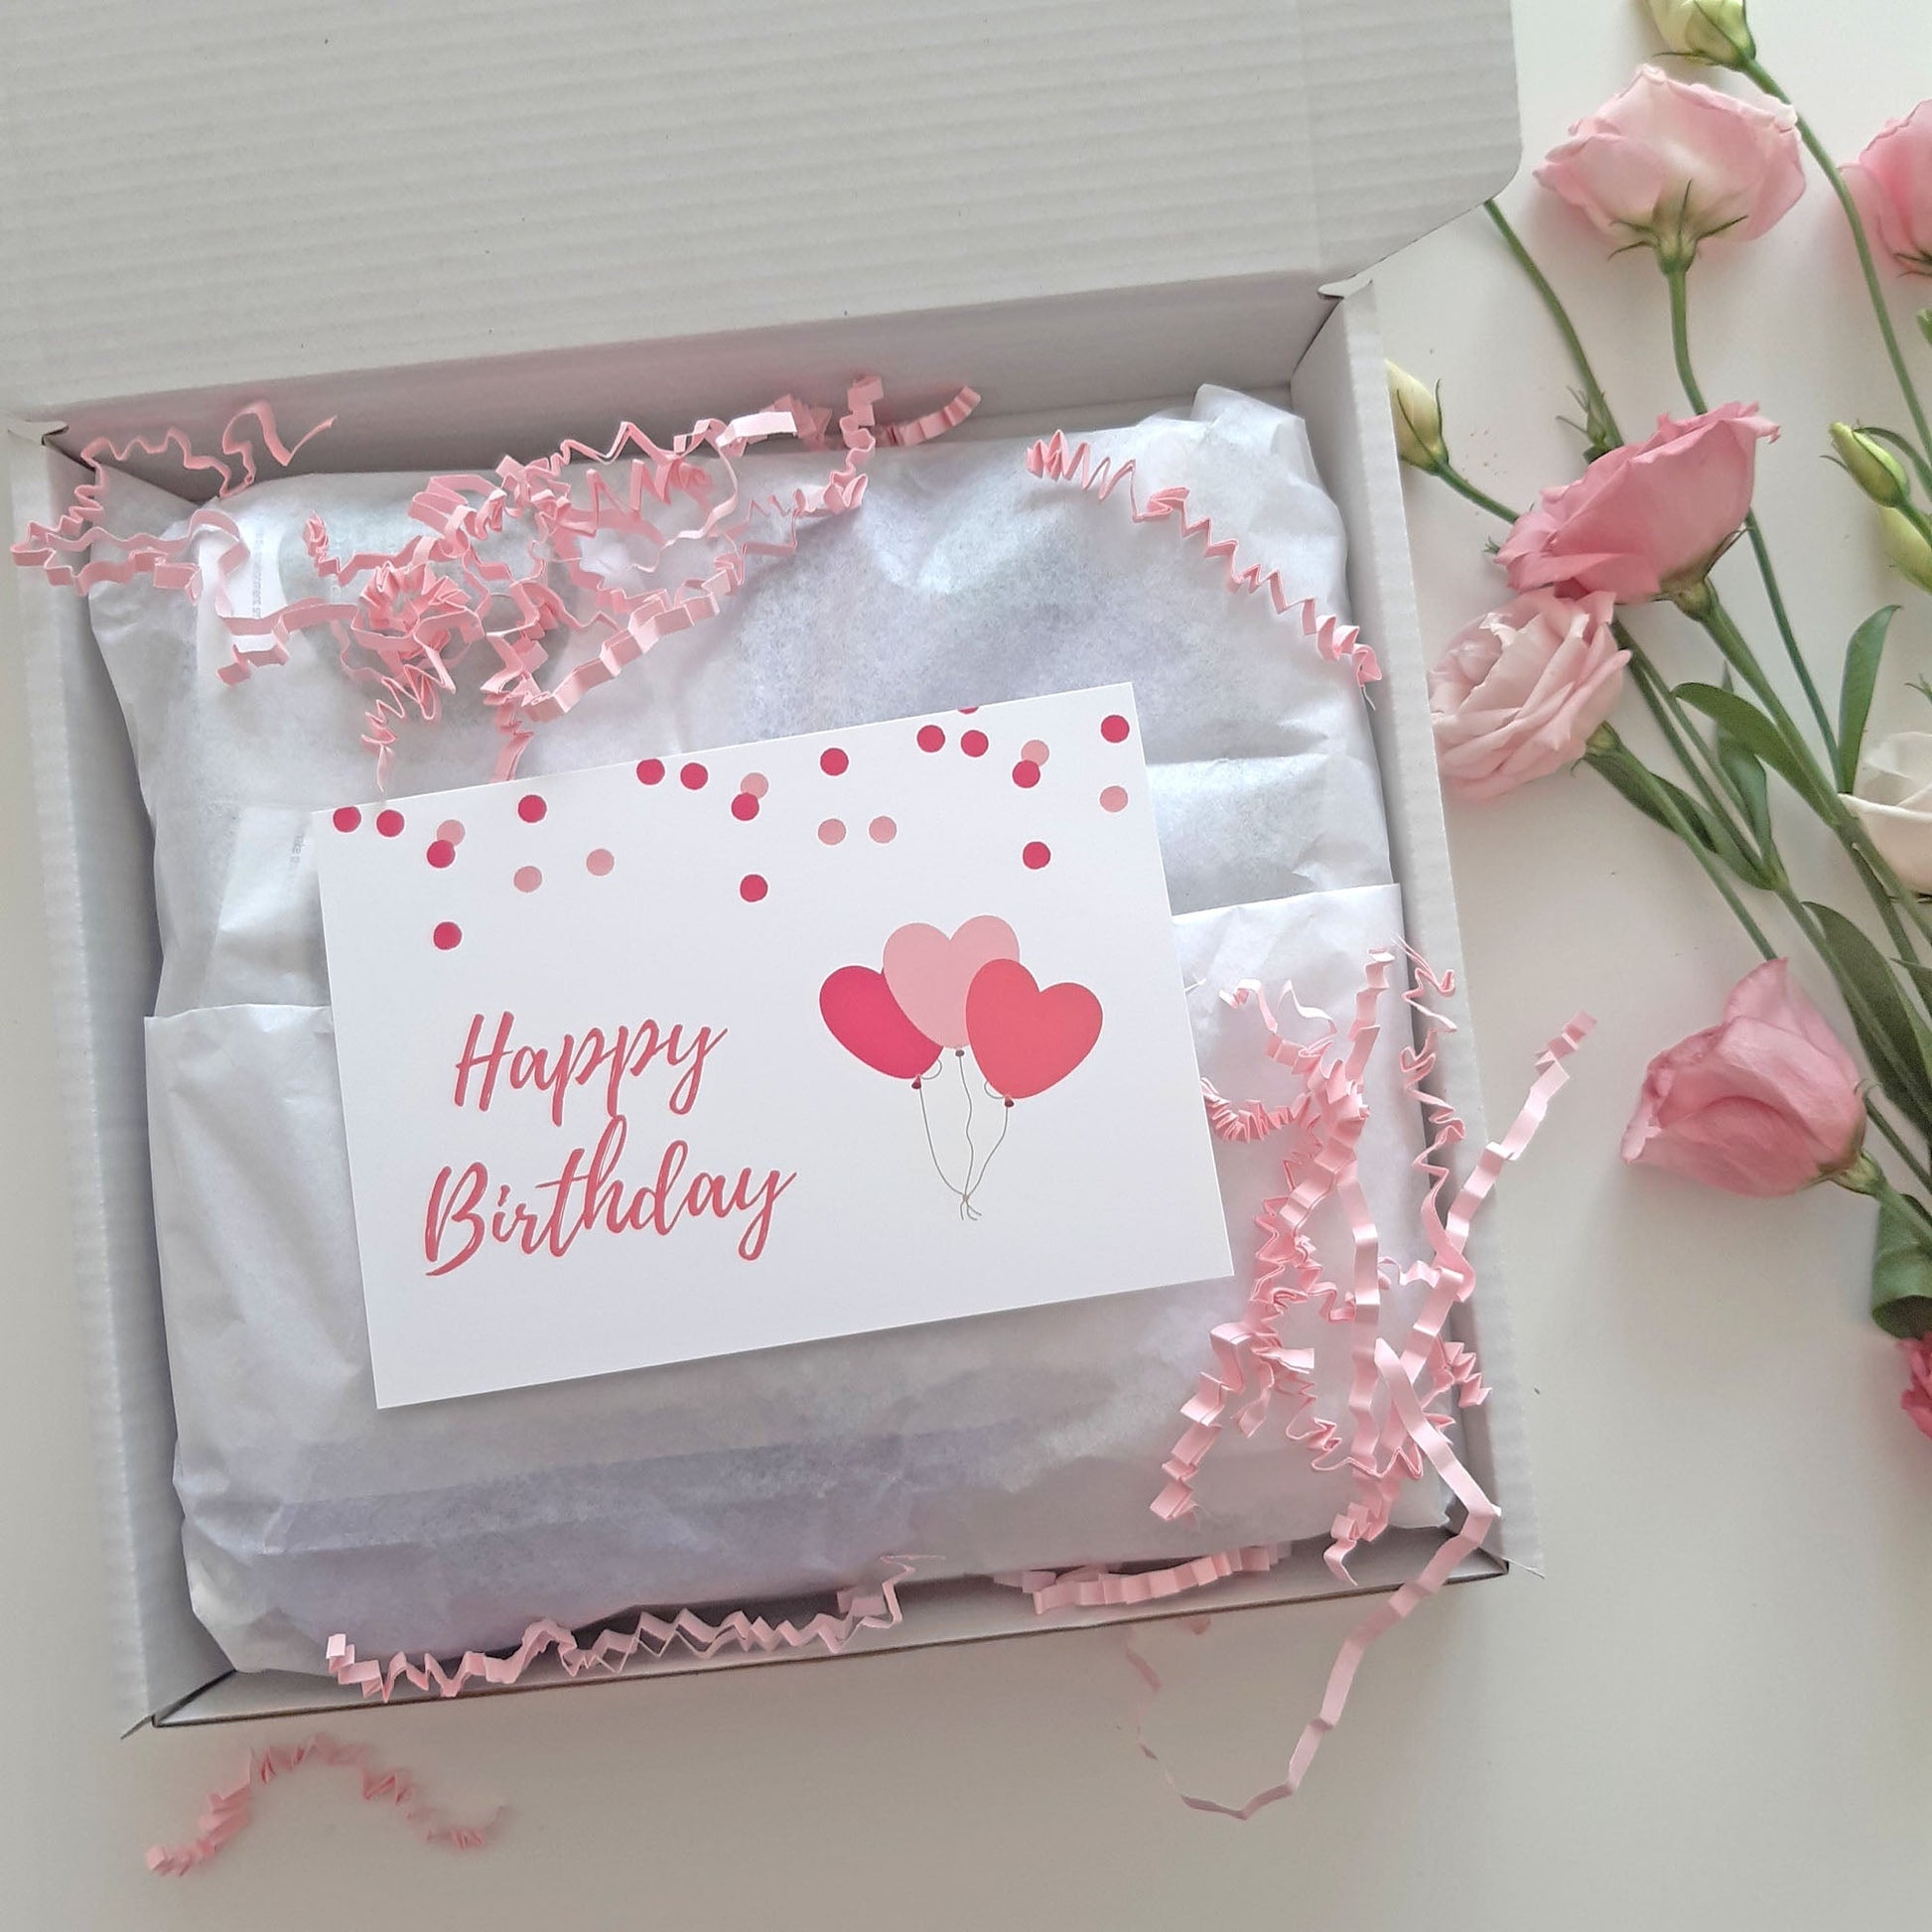 BIRTHDAY BEAUTY, SPA AND RELAXATION PAMPER HAMPER GIFTS